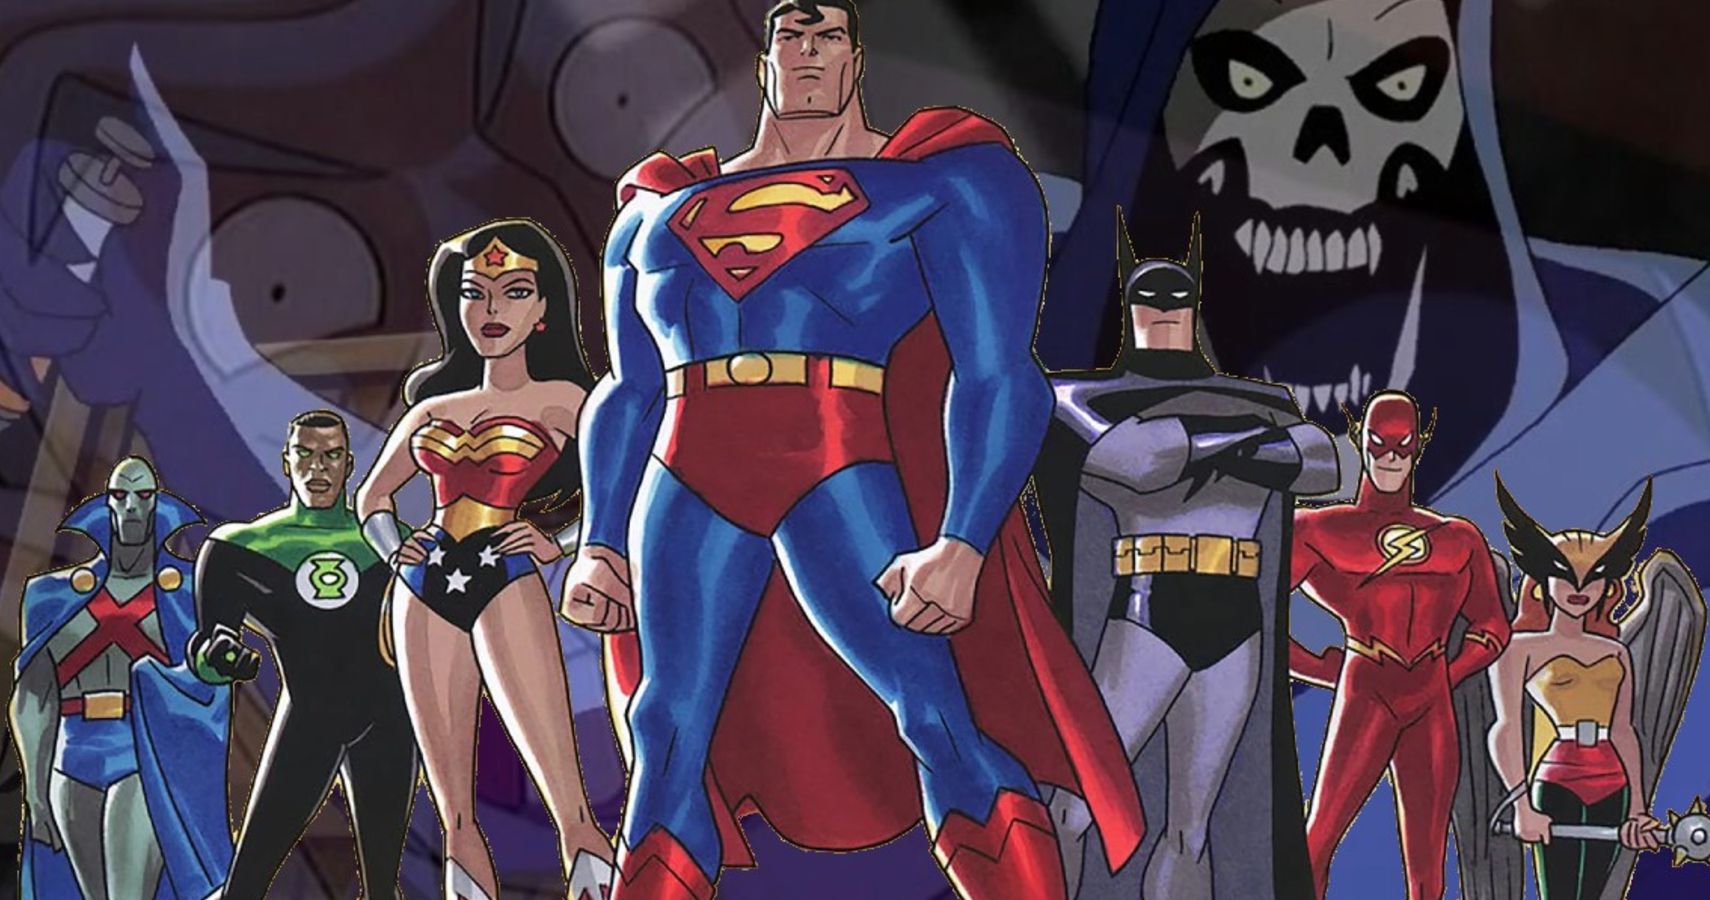 The 10 Creepiest Moments In The DCAU